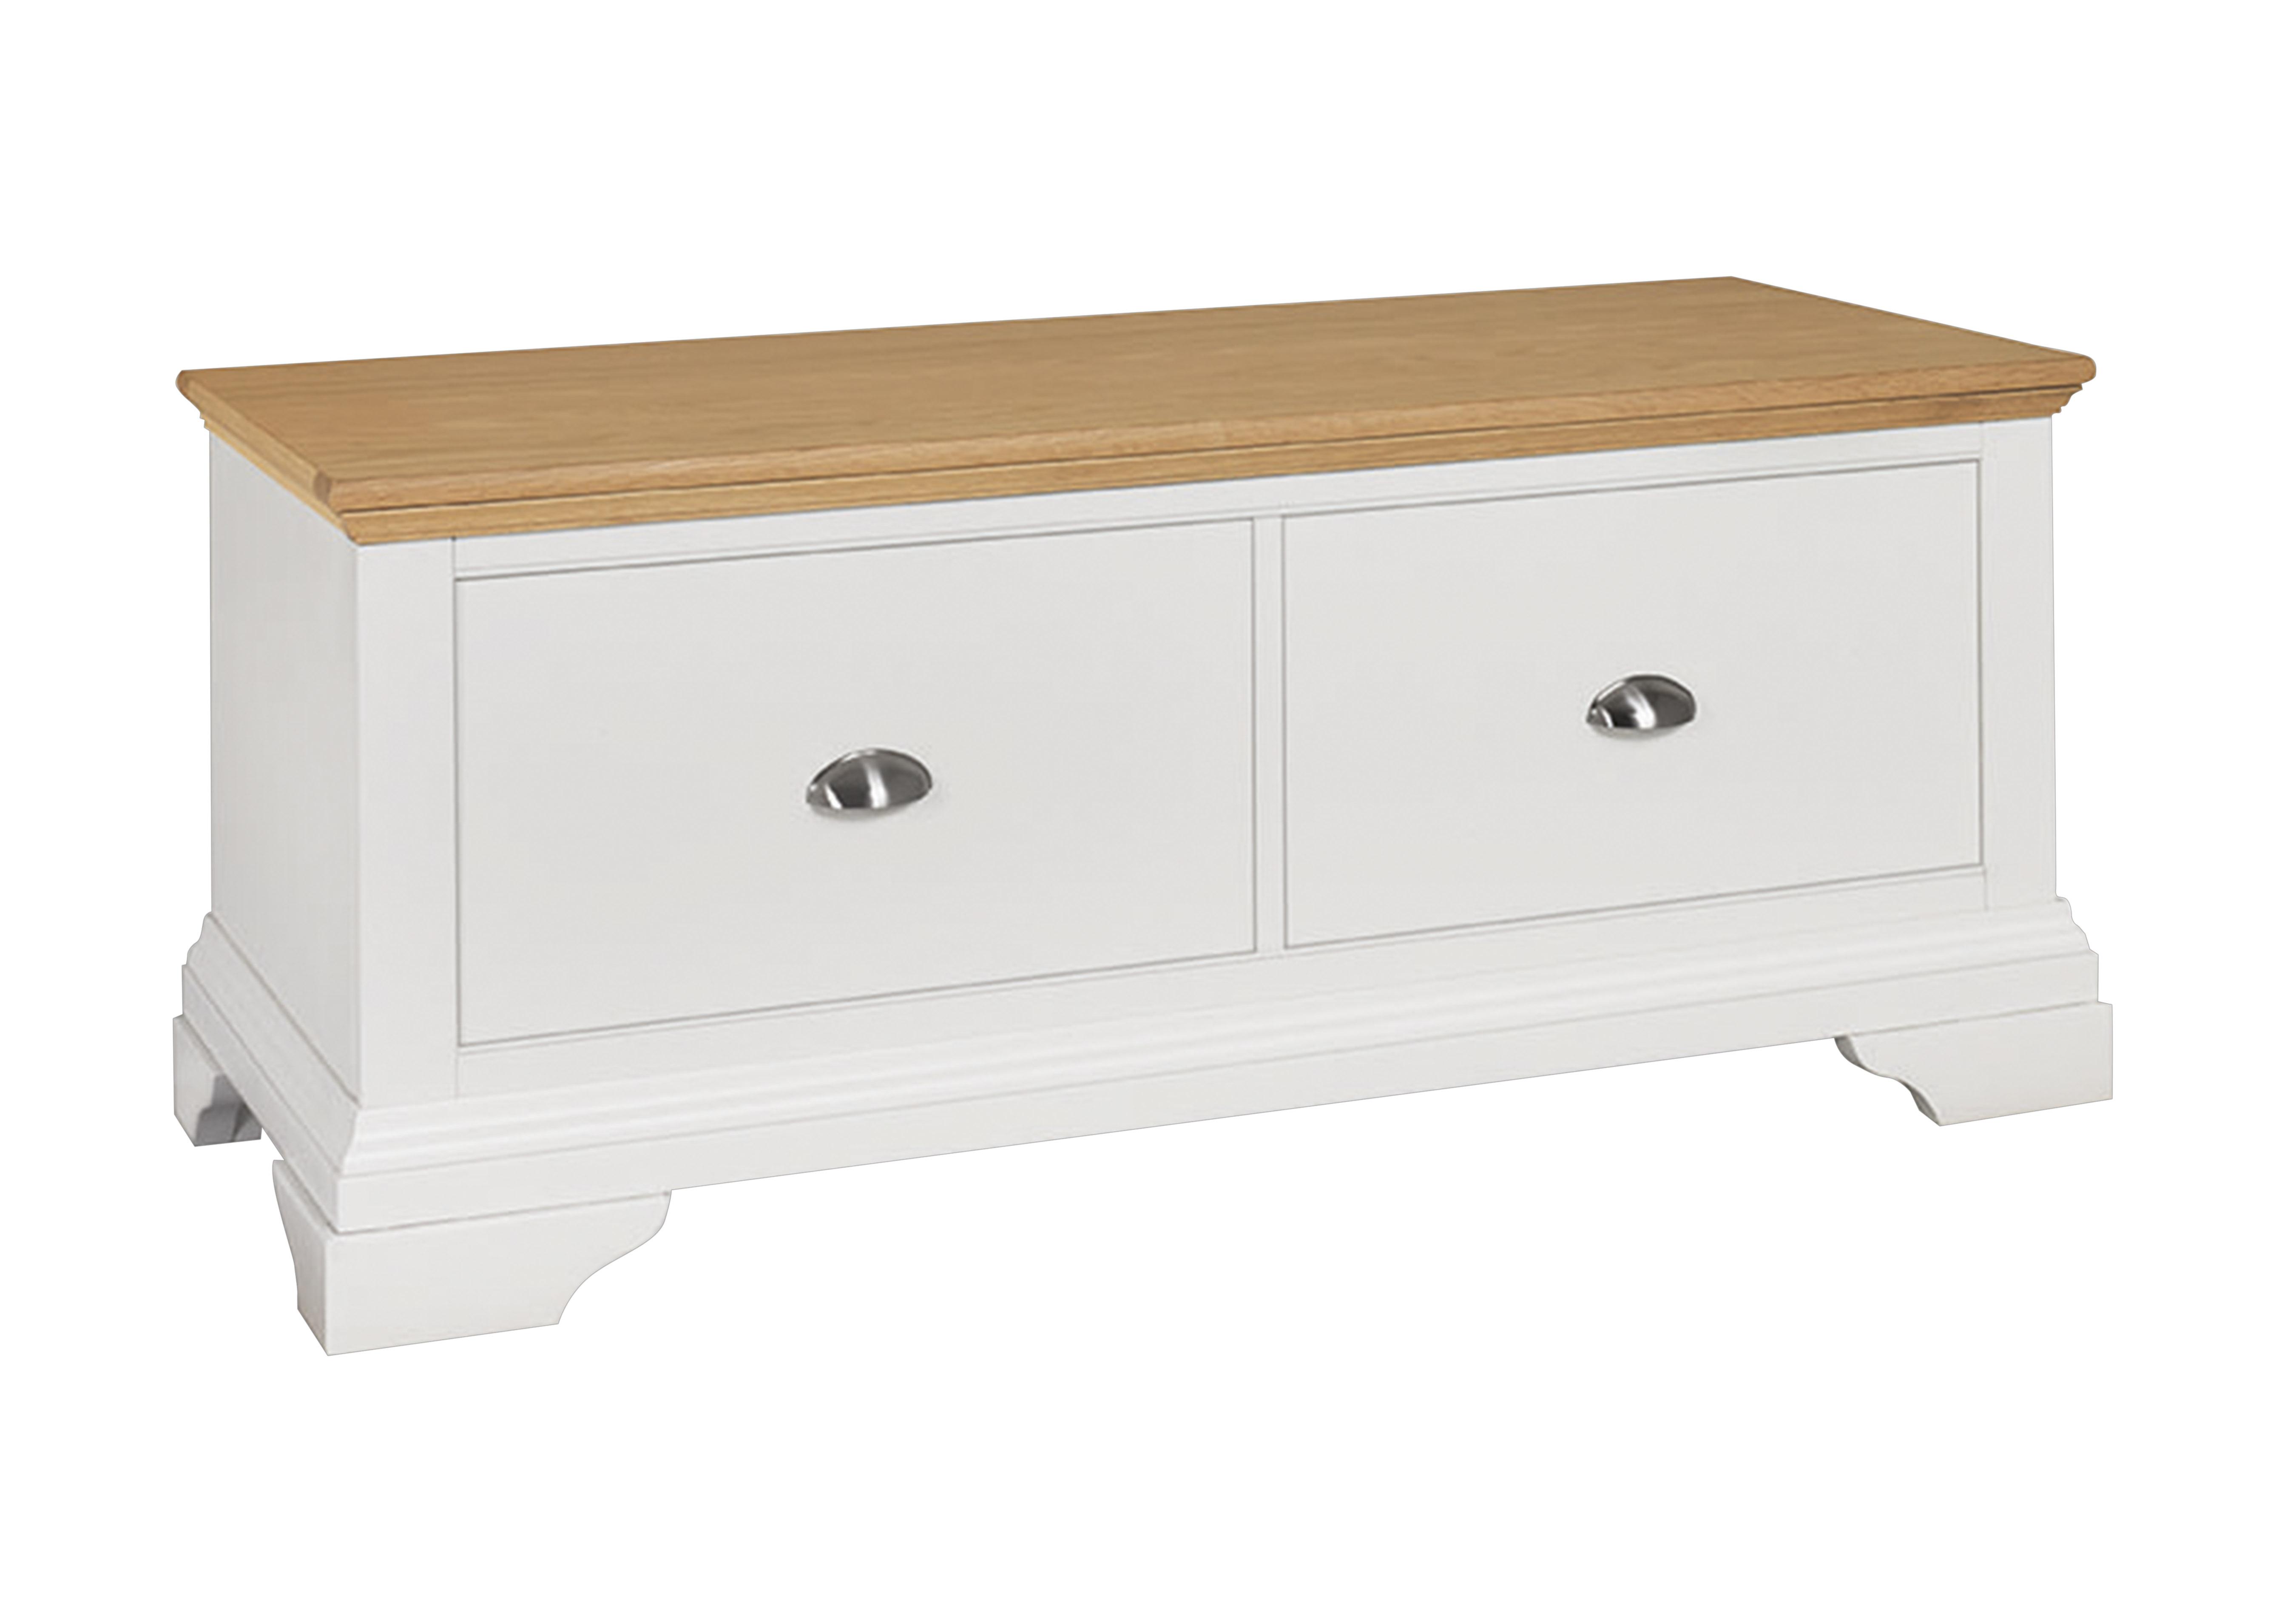 Emily Blanket Box in Ivory And Oak on Furniture Village